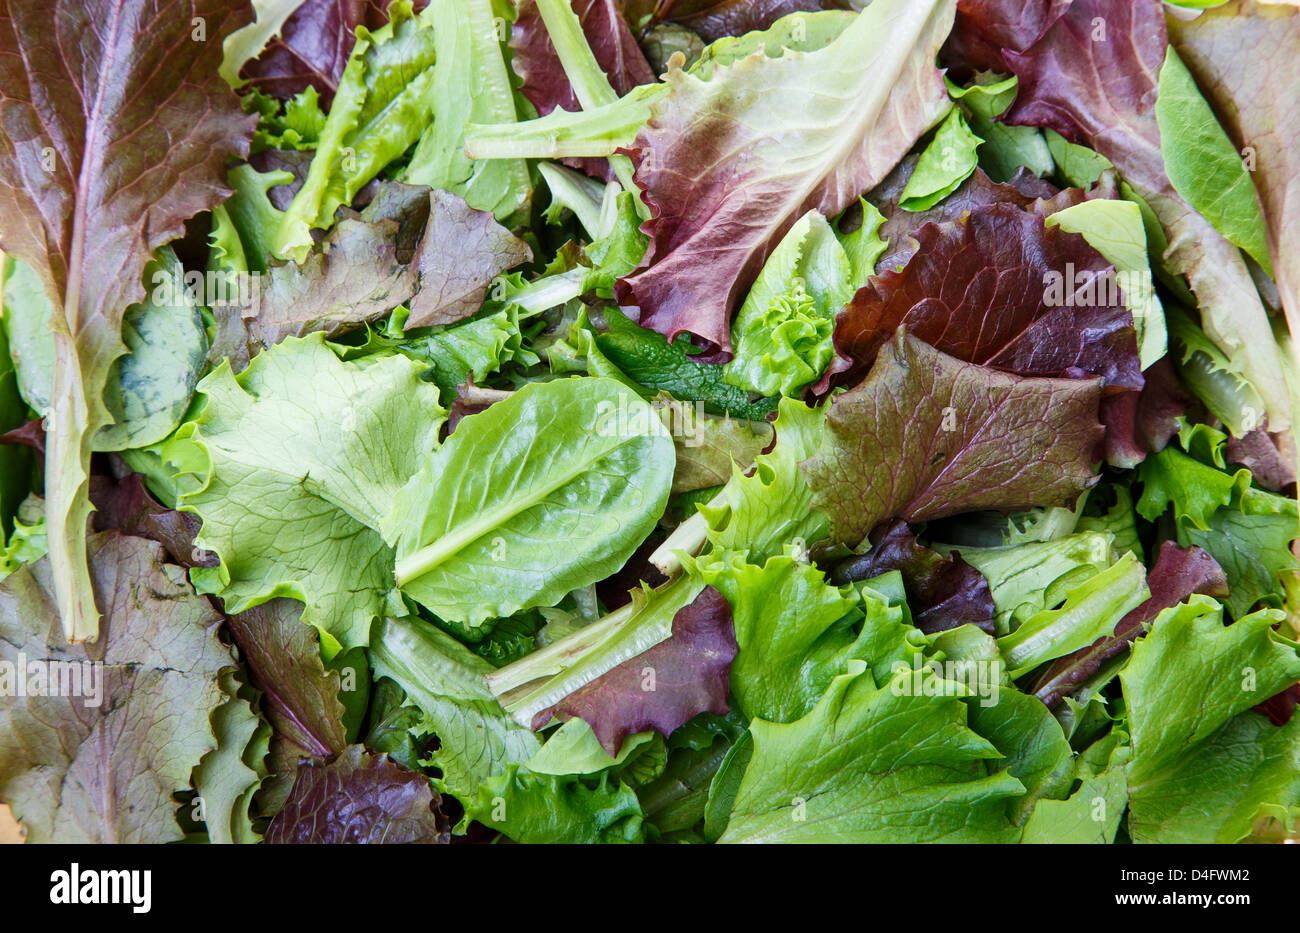 https://c8.alamy.com/comp/D4FWM2/a-background-of-mixed-greens-lettuce-and-baby-spinach-D4FWM2.jpg